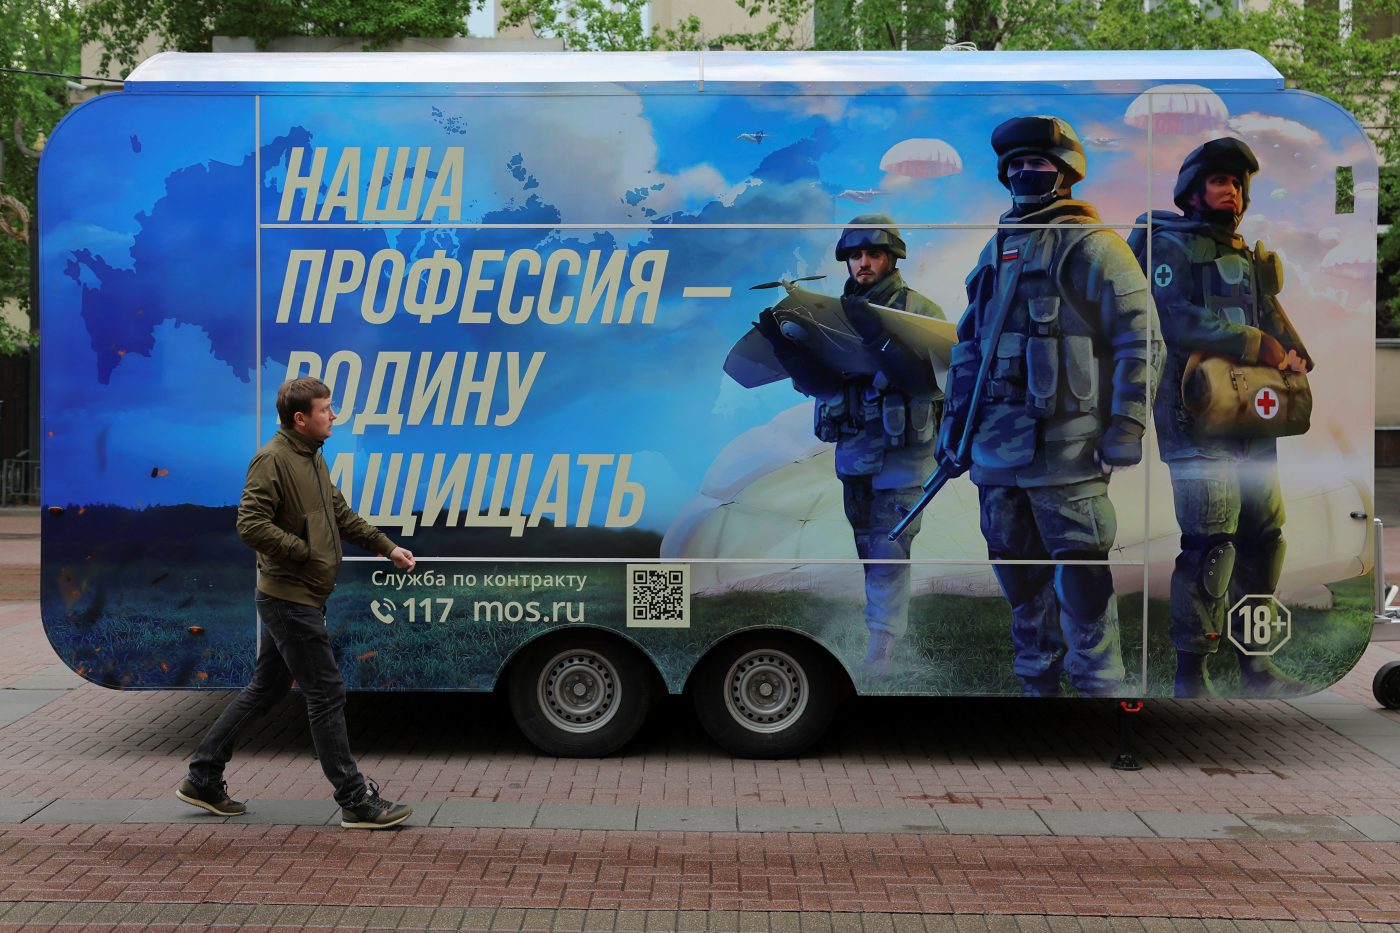 Photo: A pedestrian walks past a mobile recruitment point located to promote service in the Russian army and invite volunteers to sign a contract with the defence ministry, in a street in Moscow, Russia, May 3, 2023. A slogan reads: "Our profession is to defend fatherland". Credit: REUTERS/Evgenia Novozhenina